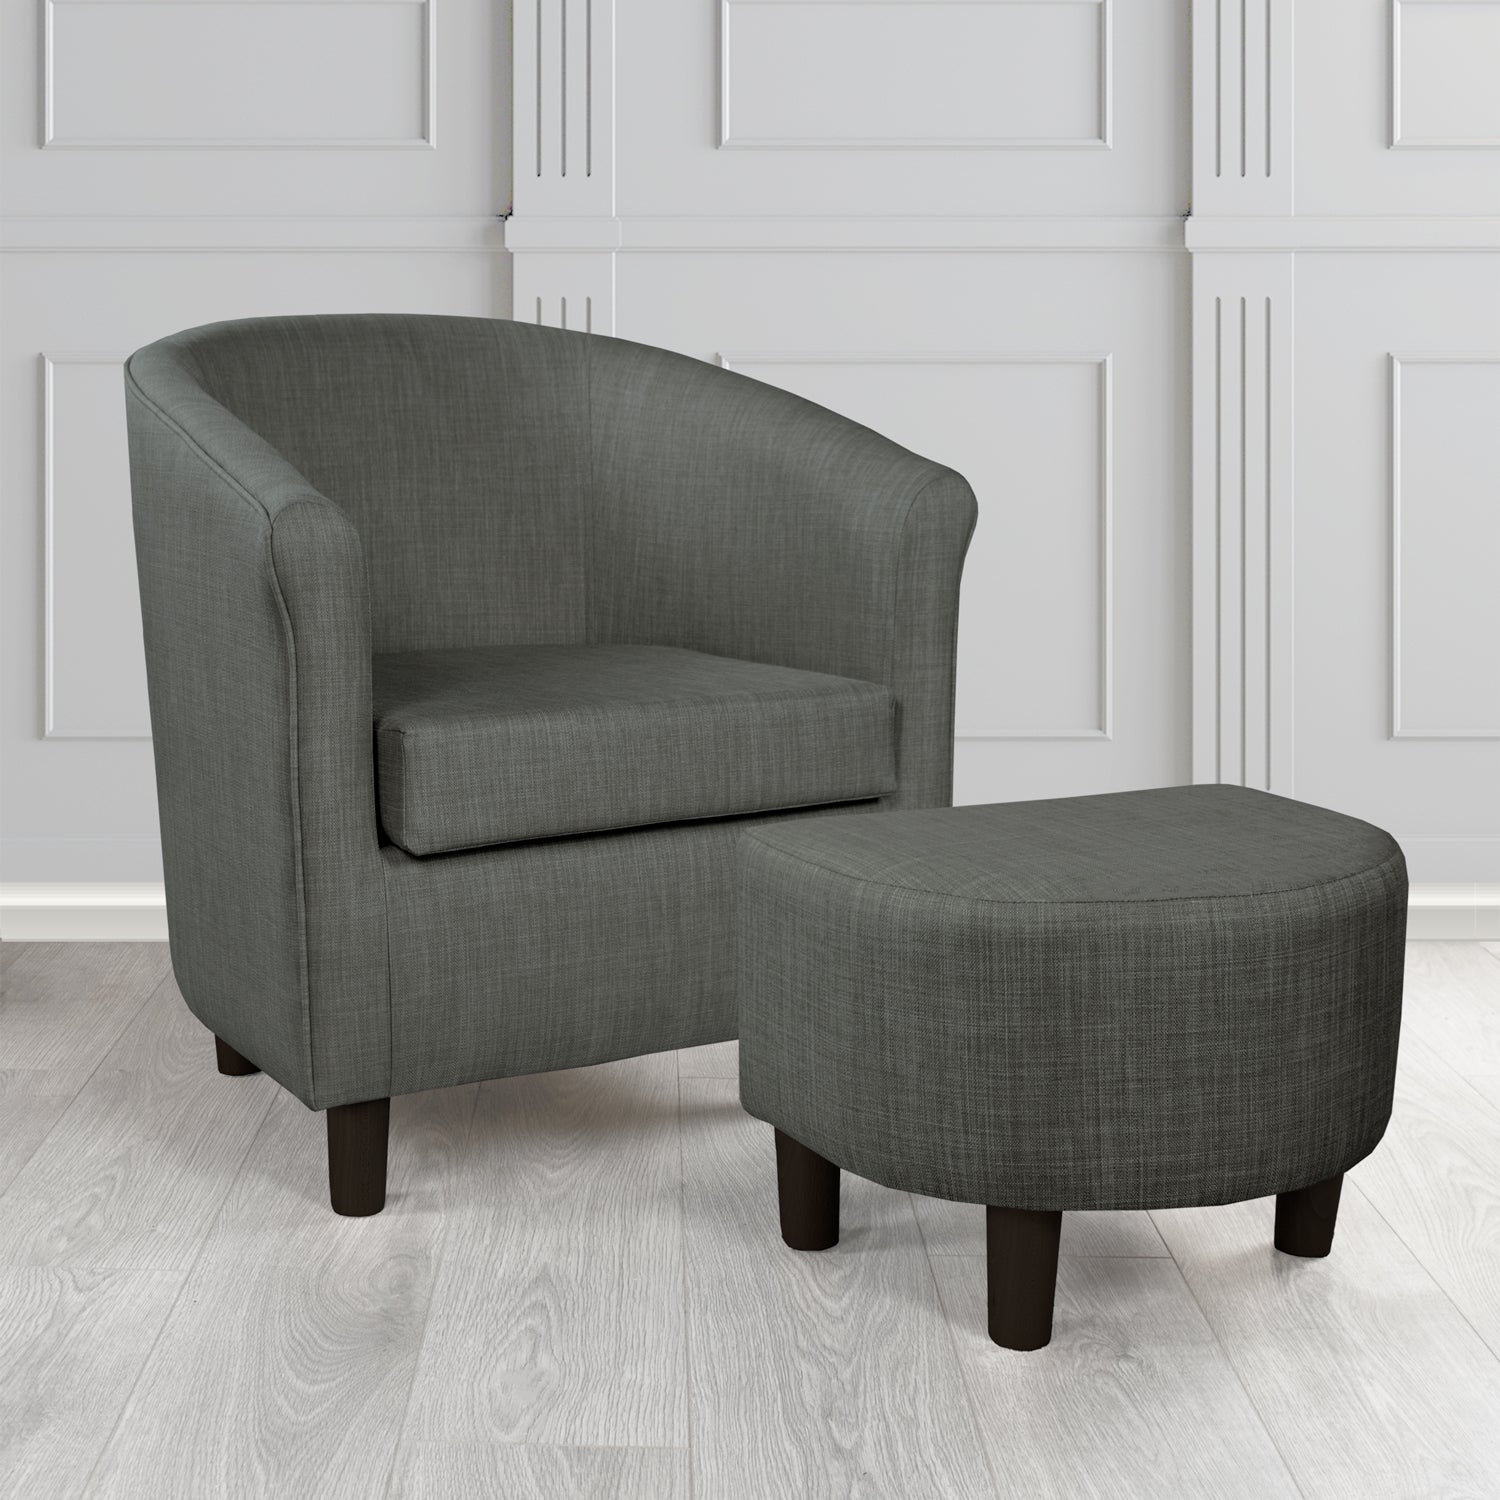 Tuscany Charles Charcoal Linen Plain Fabric Tub Chair with Dee Footstool Set - The Tub Chair Shop